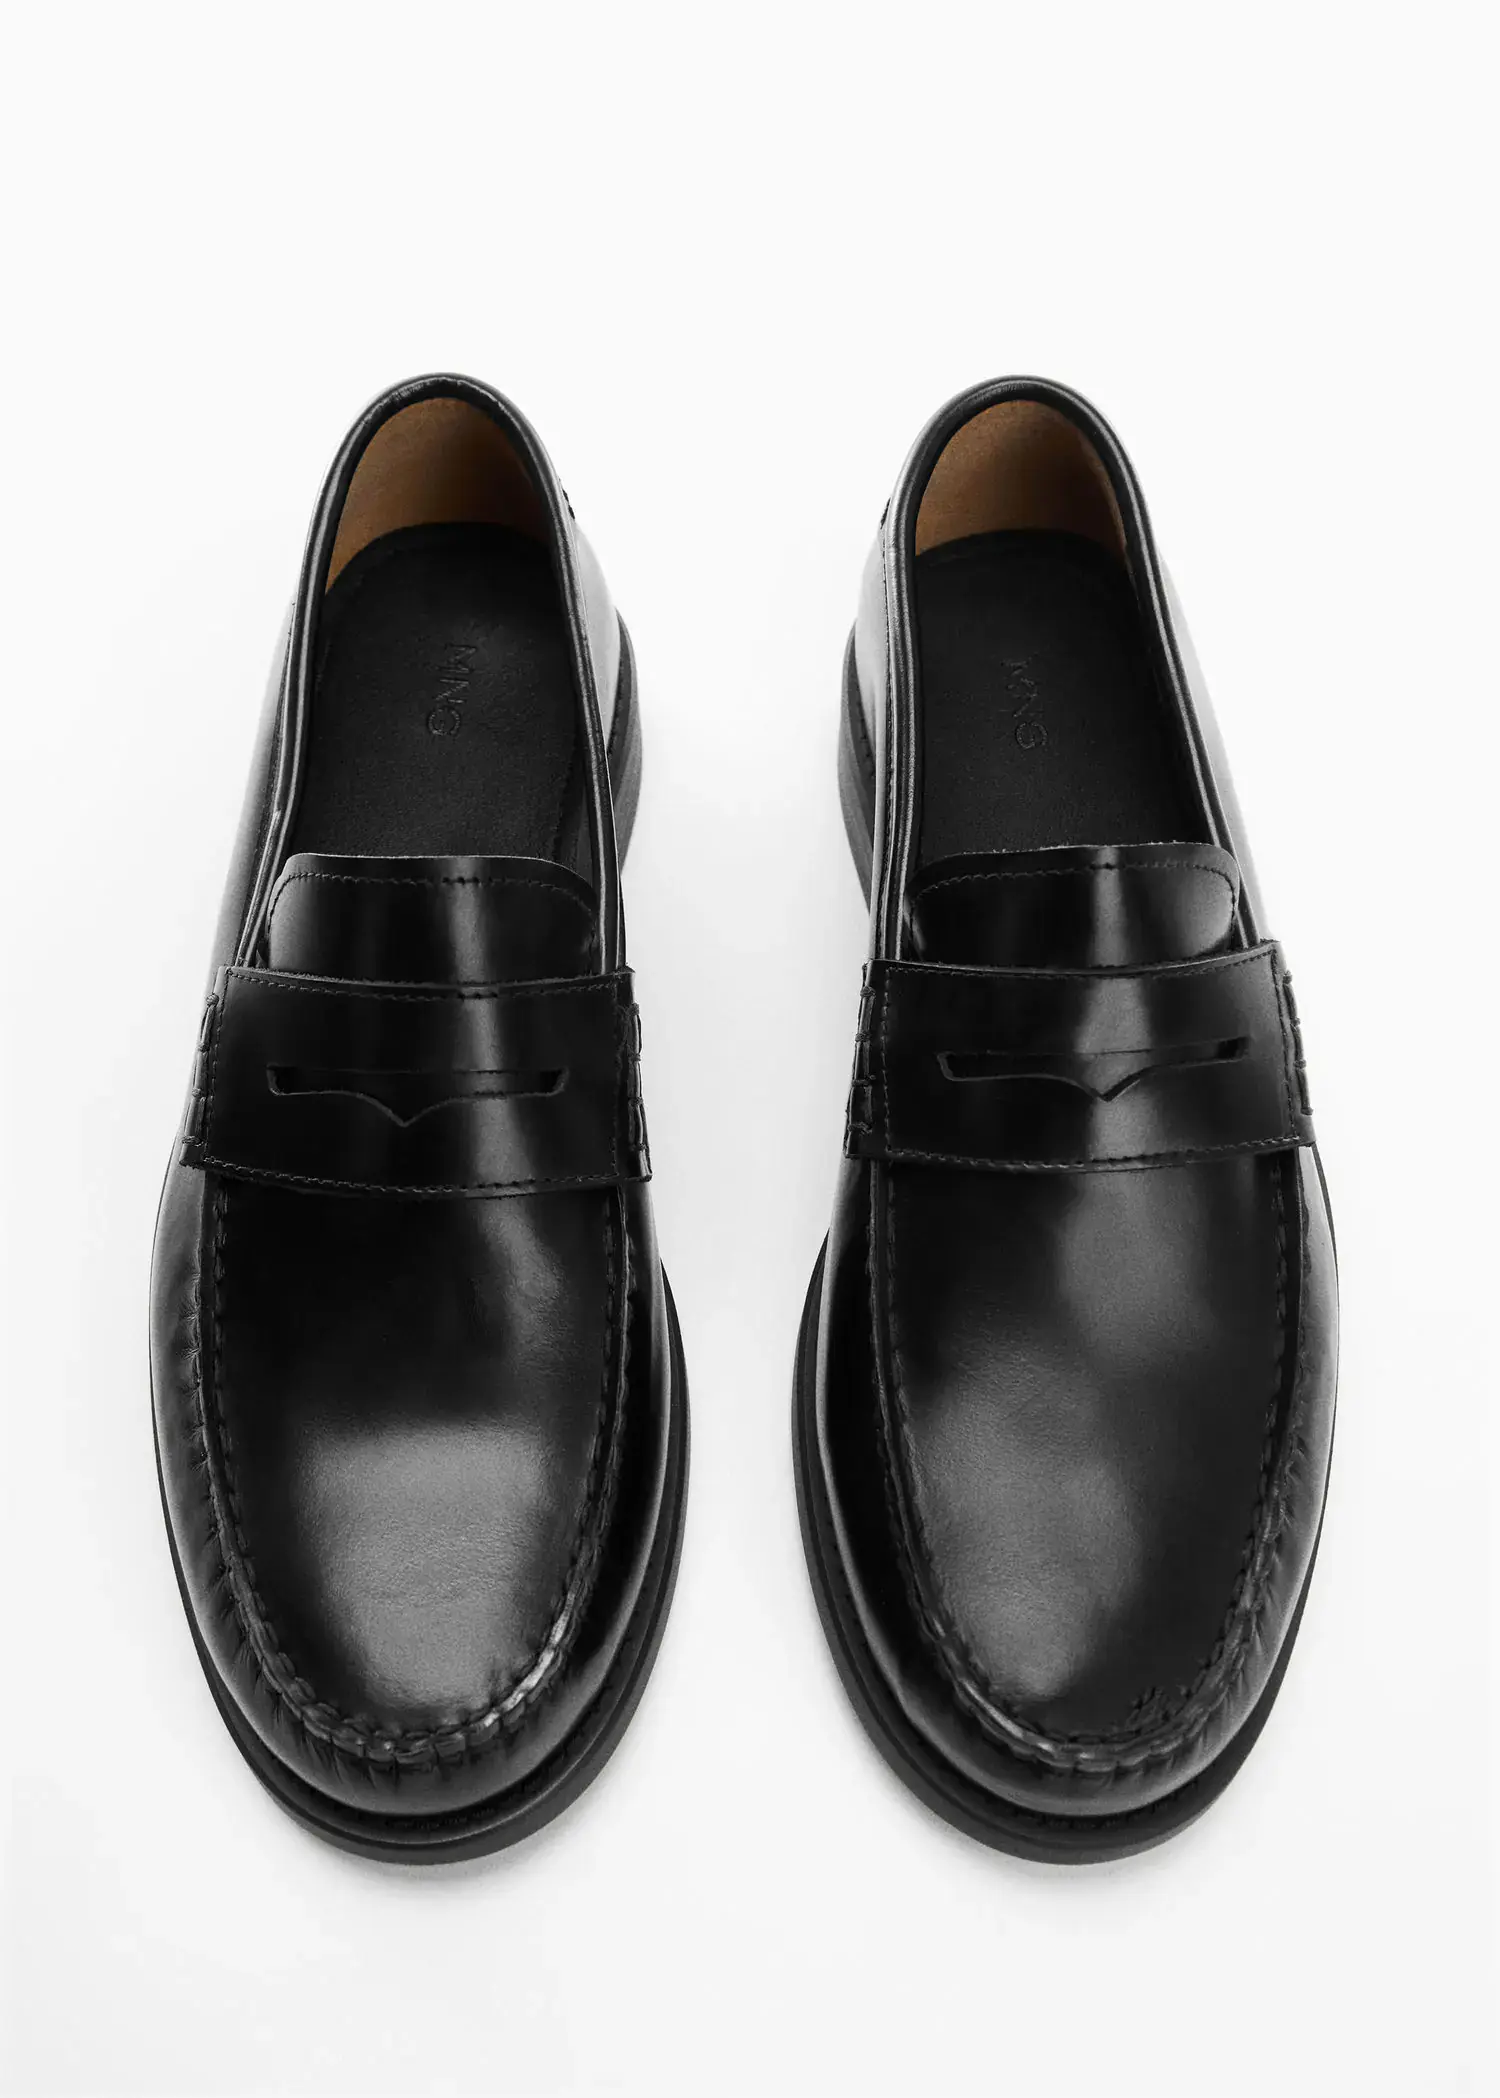 Mango Aged-leather loafers. 1